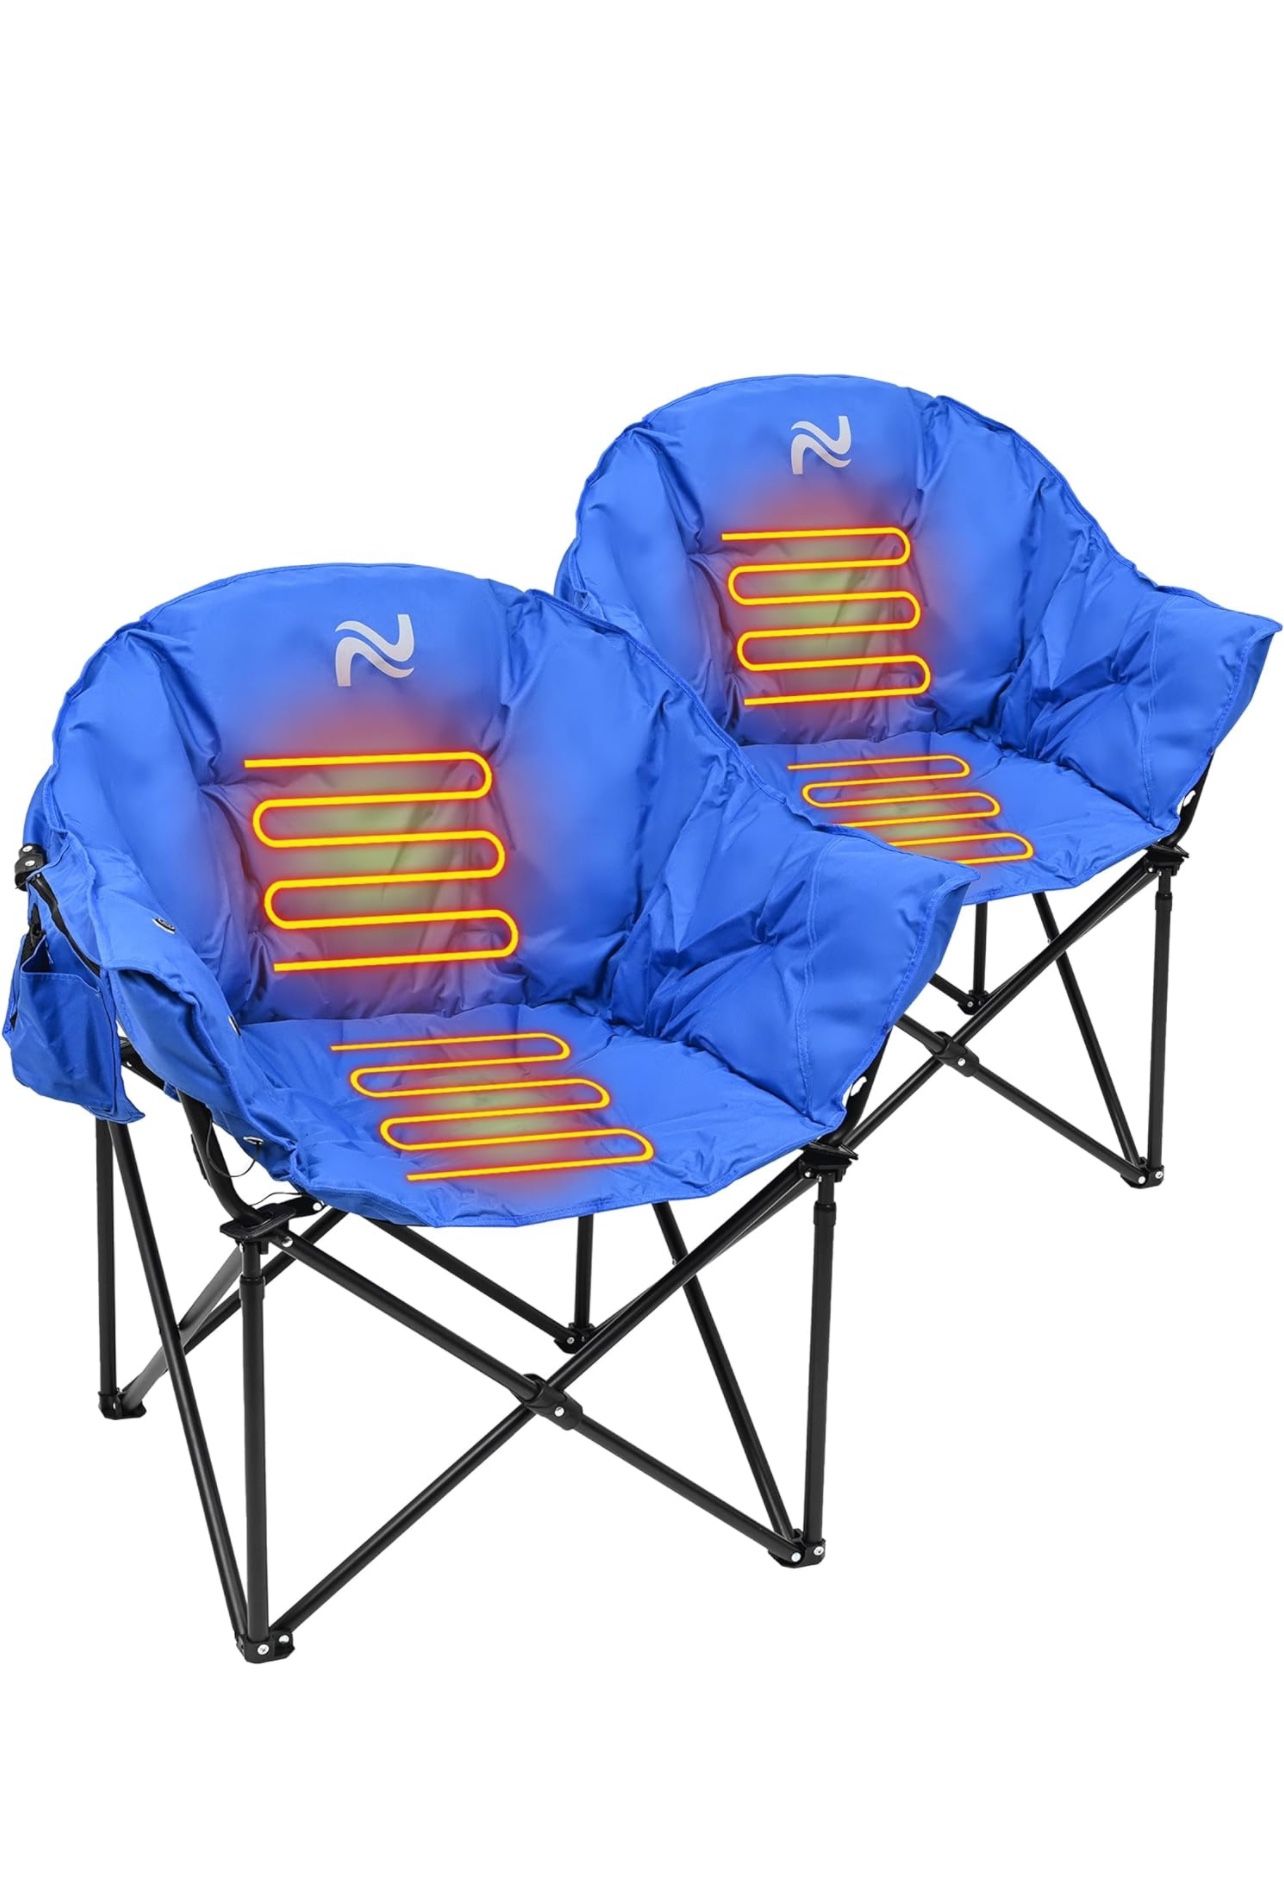 Two Oversized Portable Heated Camping Chairs